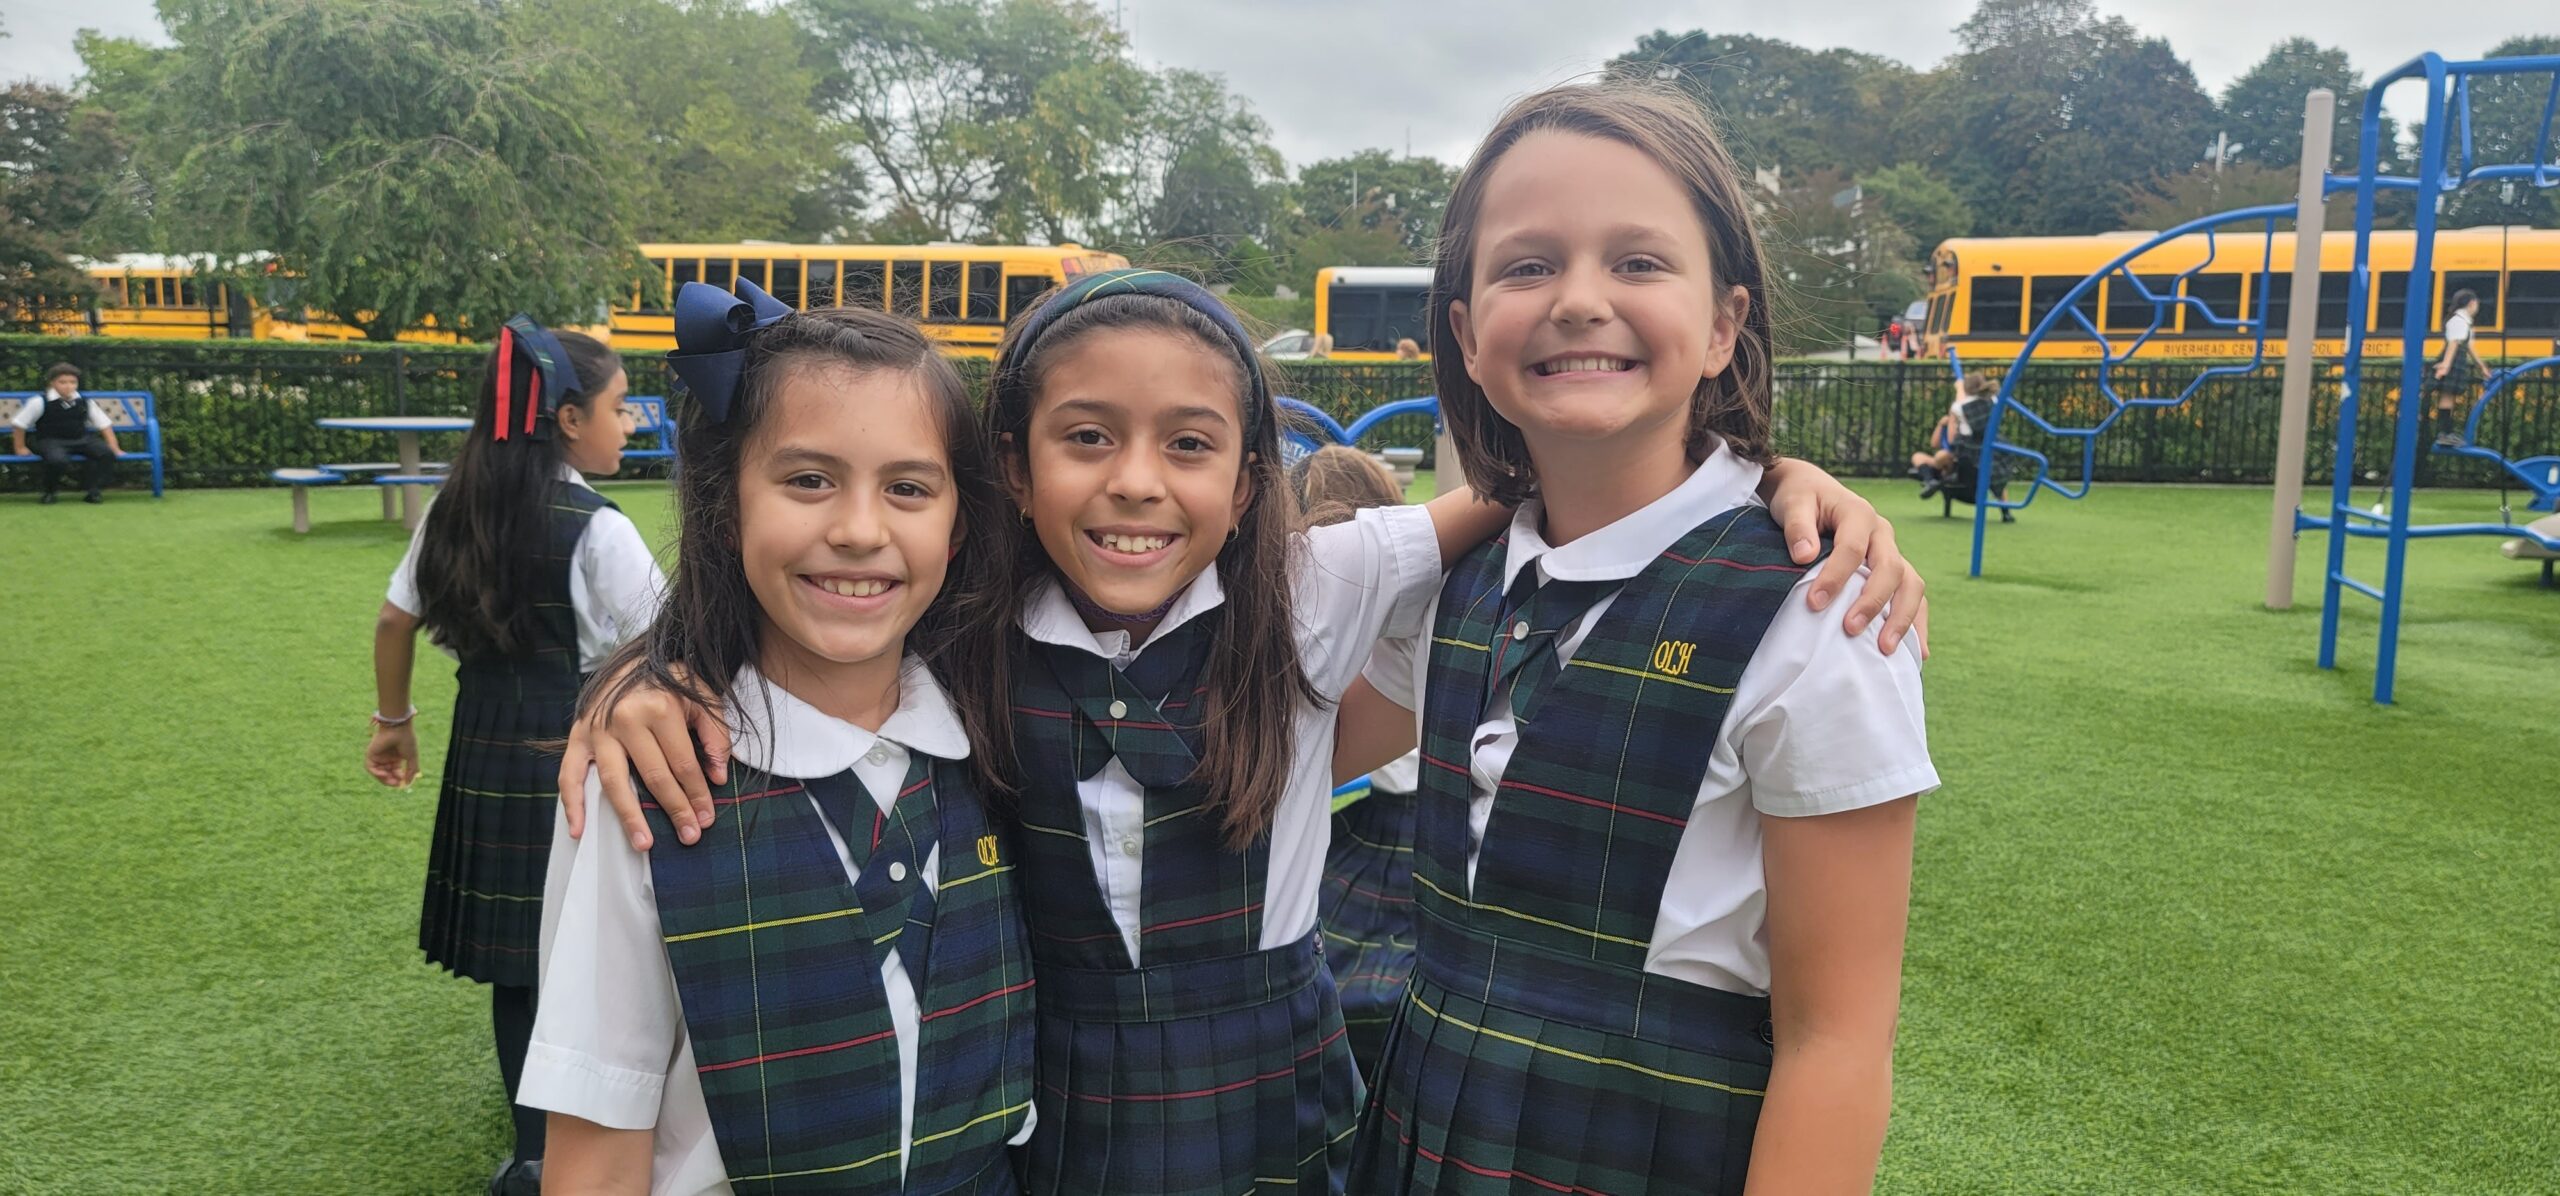 Our Lady of the Hamptons School fourth-graders, from left, Aurbree Gutierrez, Nicole Cardona and Helena Gredysa, enjoy a summer day on the playground. COURTESY OUR LADY OF THE HAMPTONS